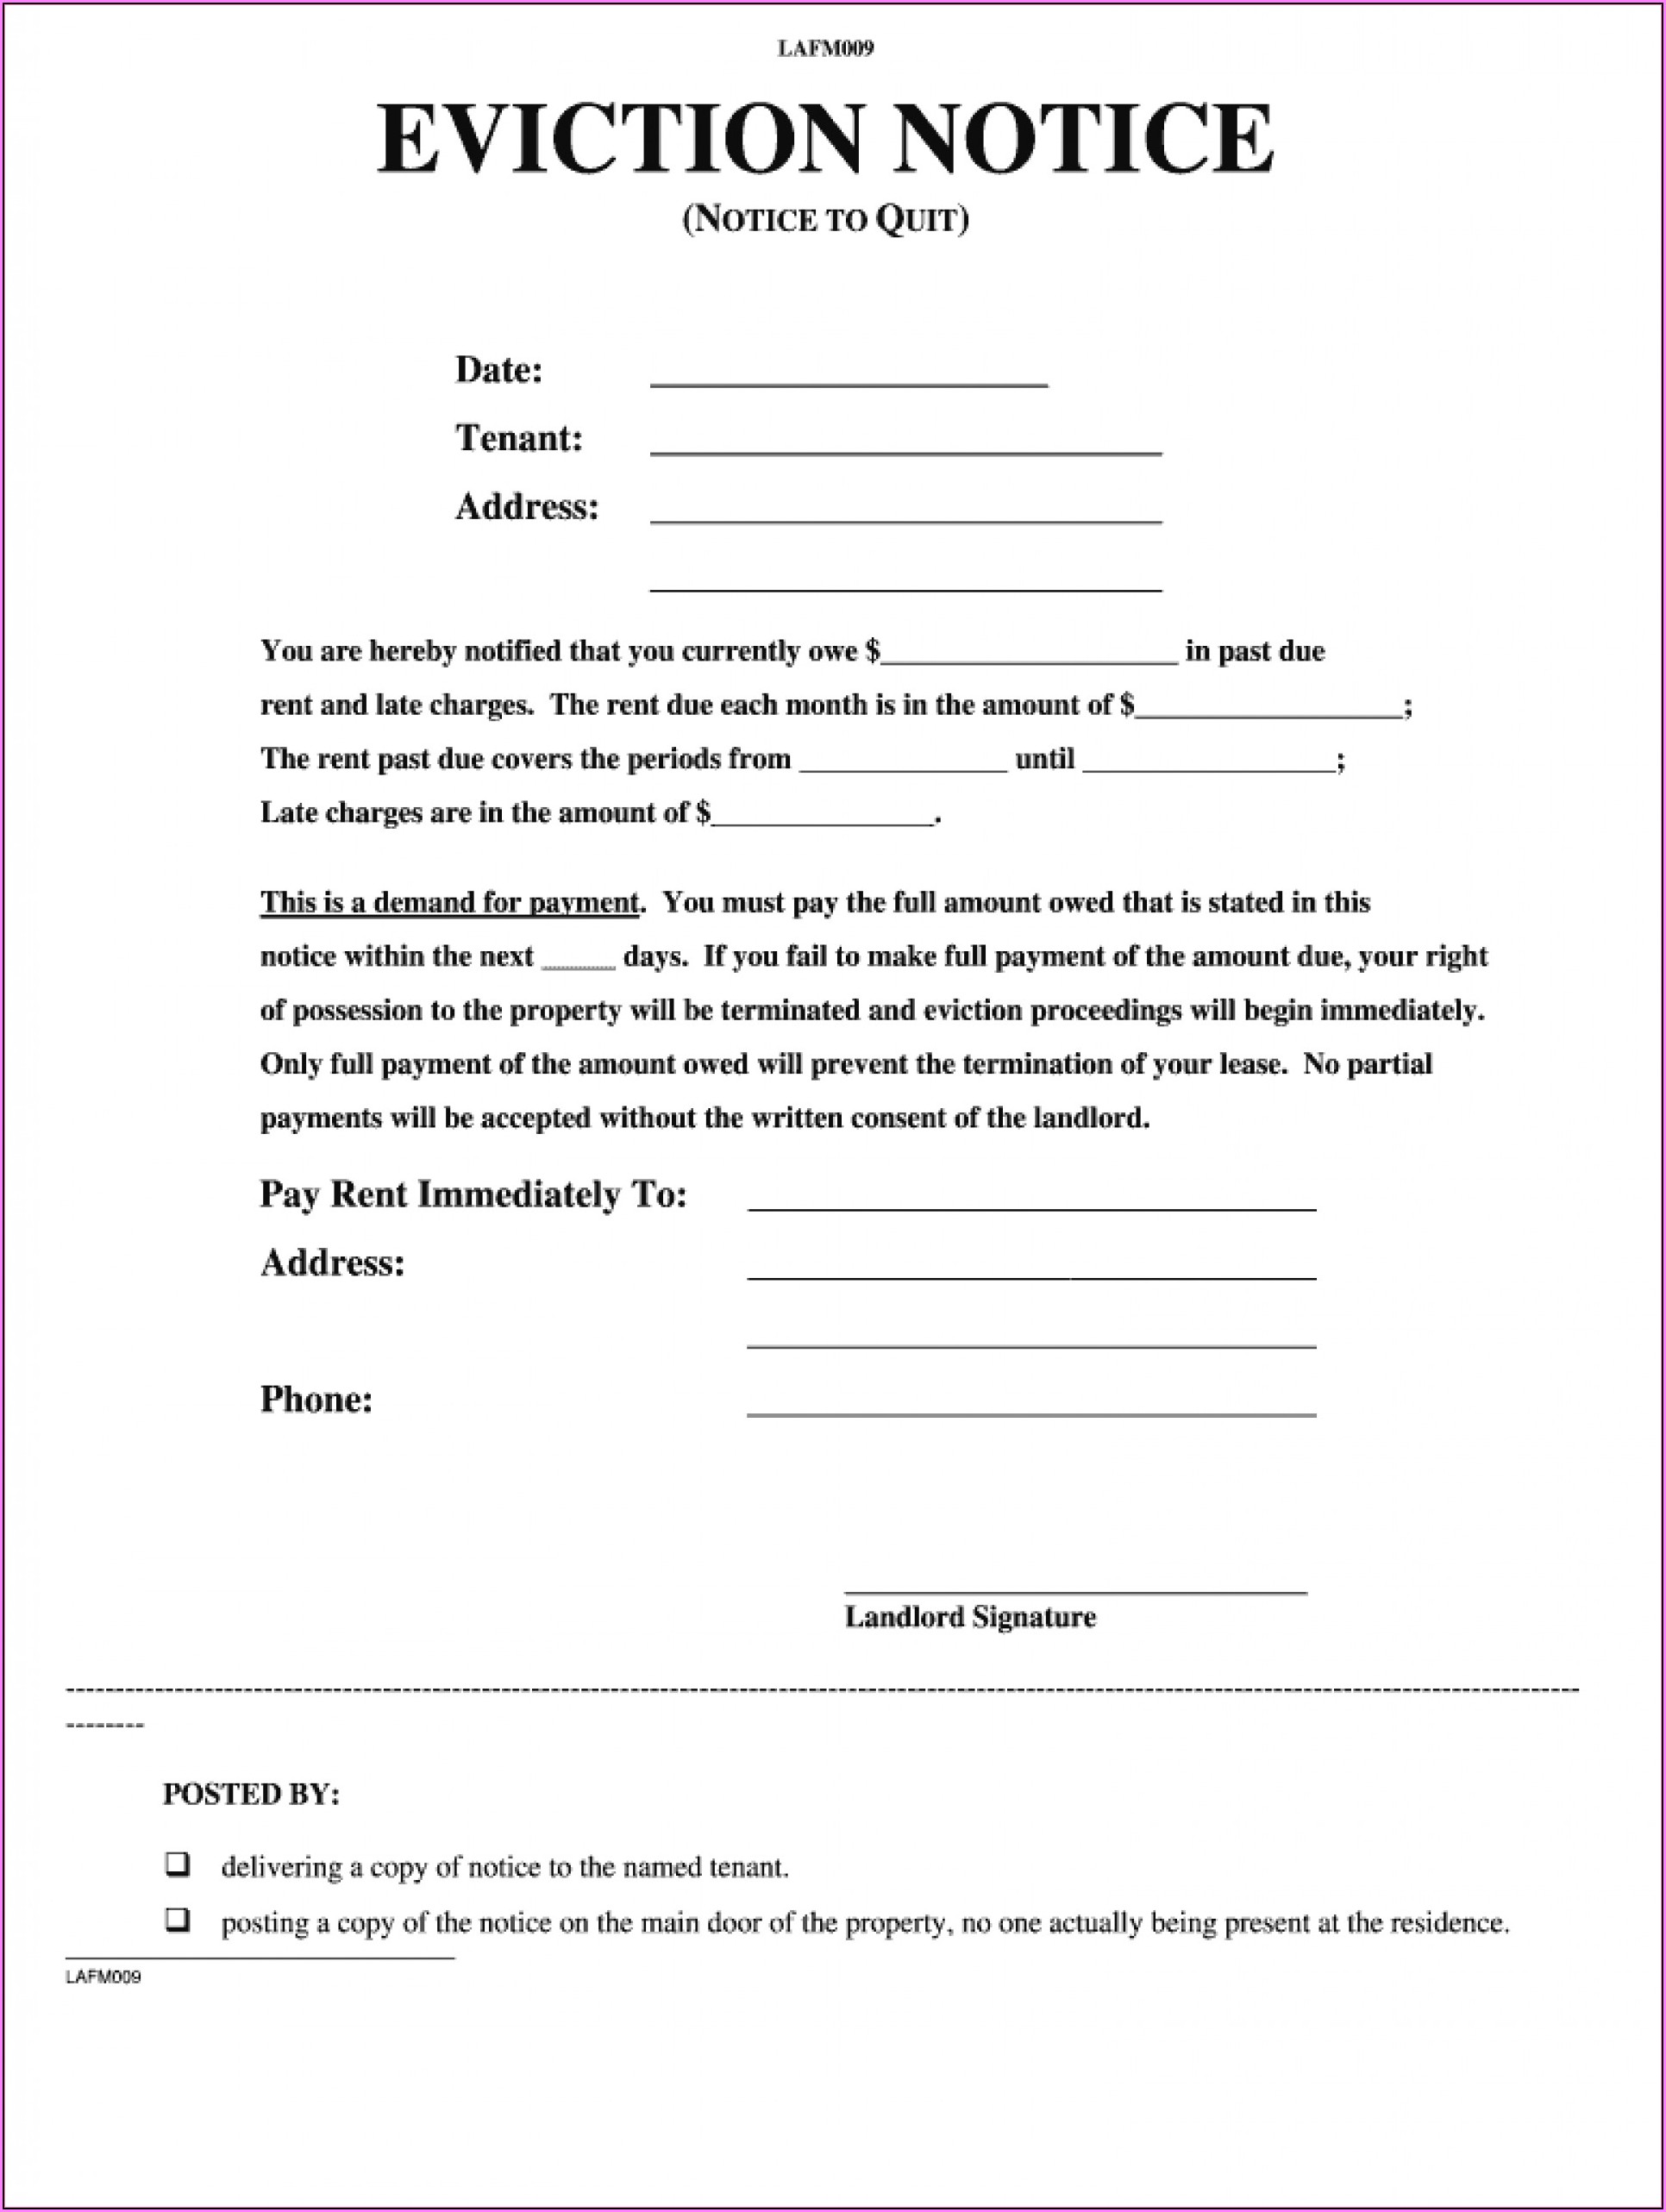 lodger-eviction-notice-template-california-template-1-free-illinois-eviction-notice-form-2021